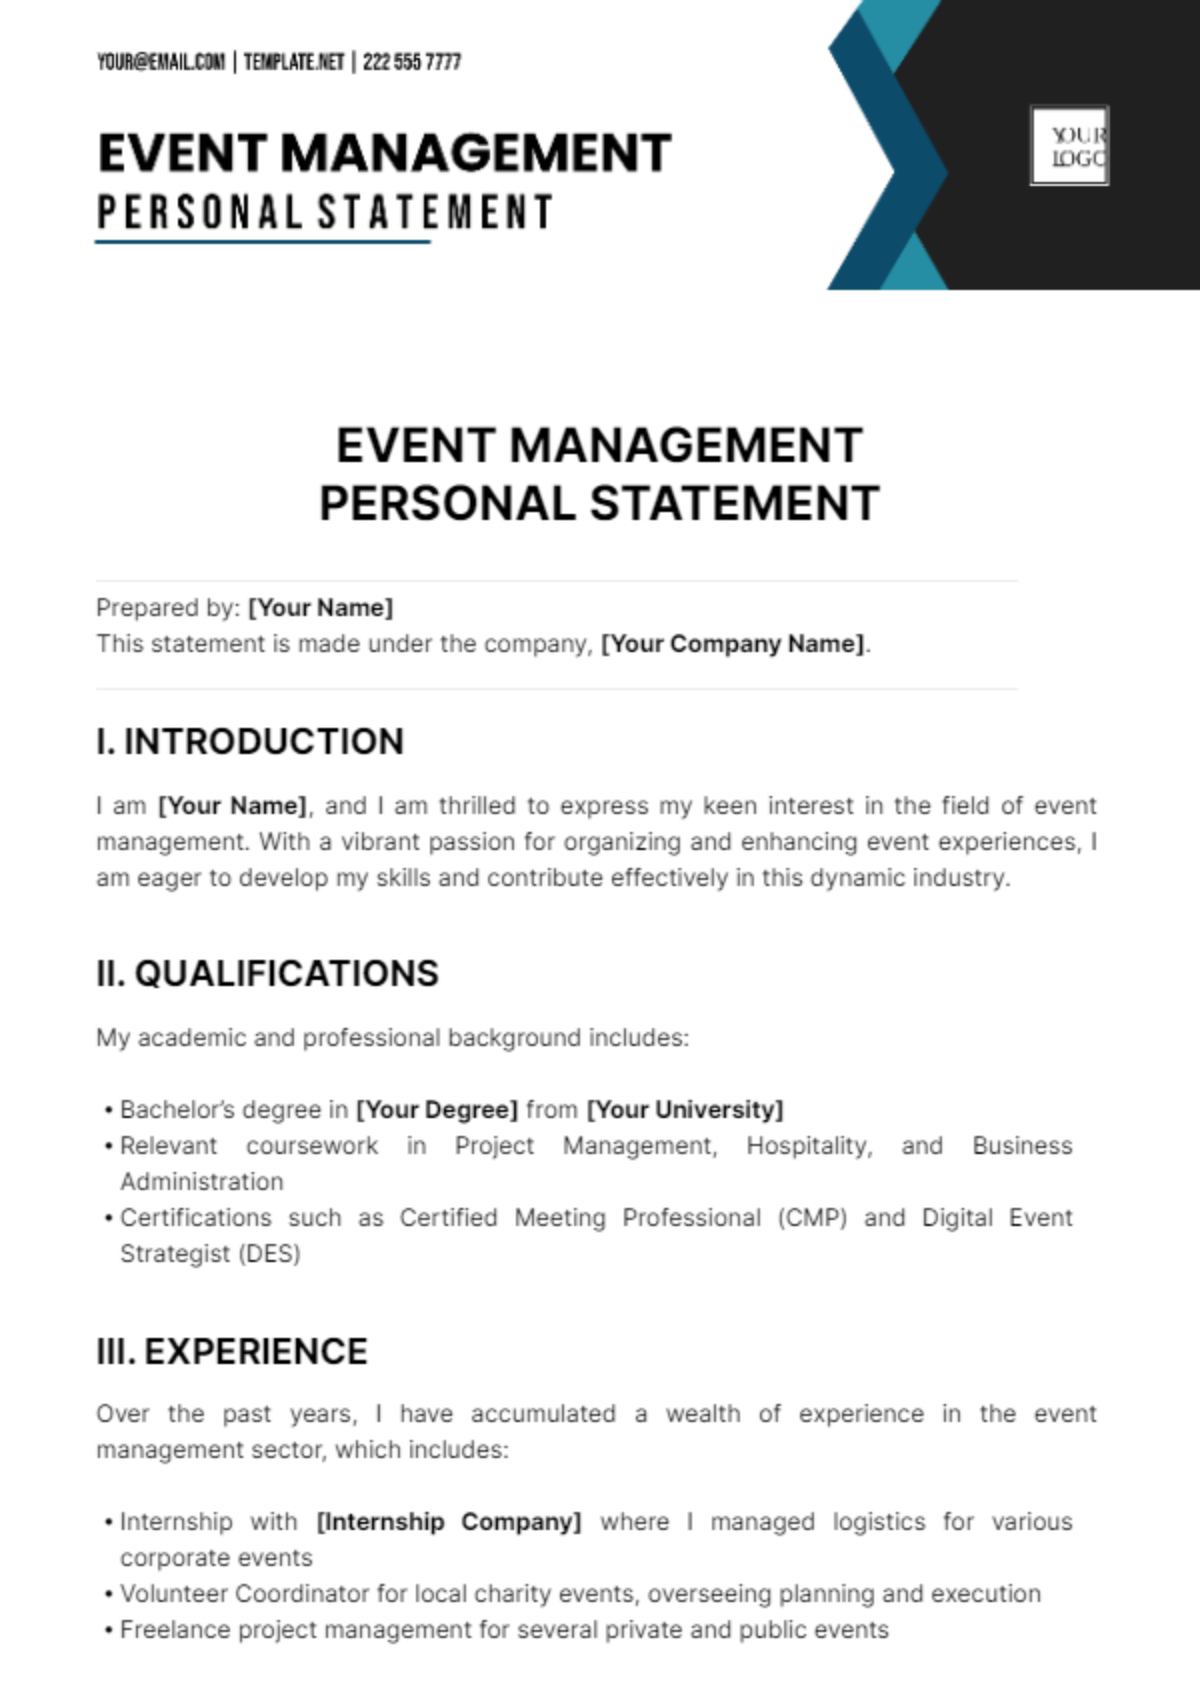 Free Event Management Personal Statement Template